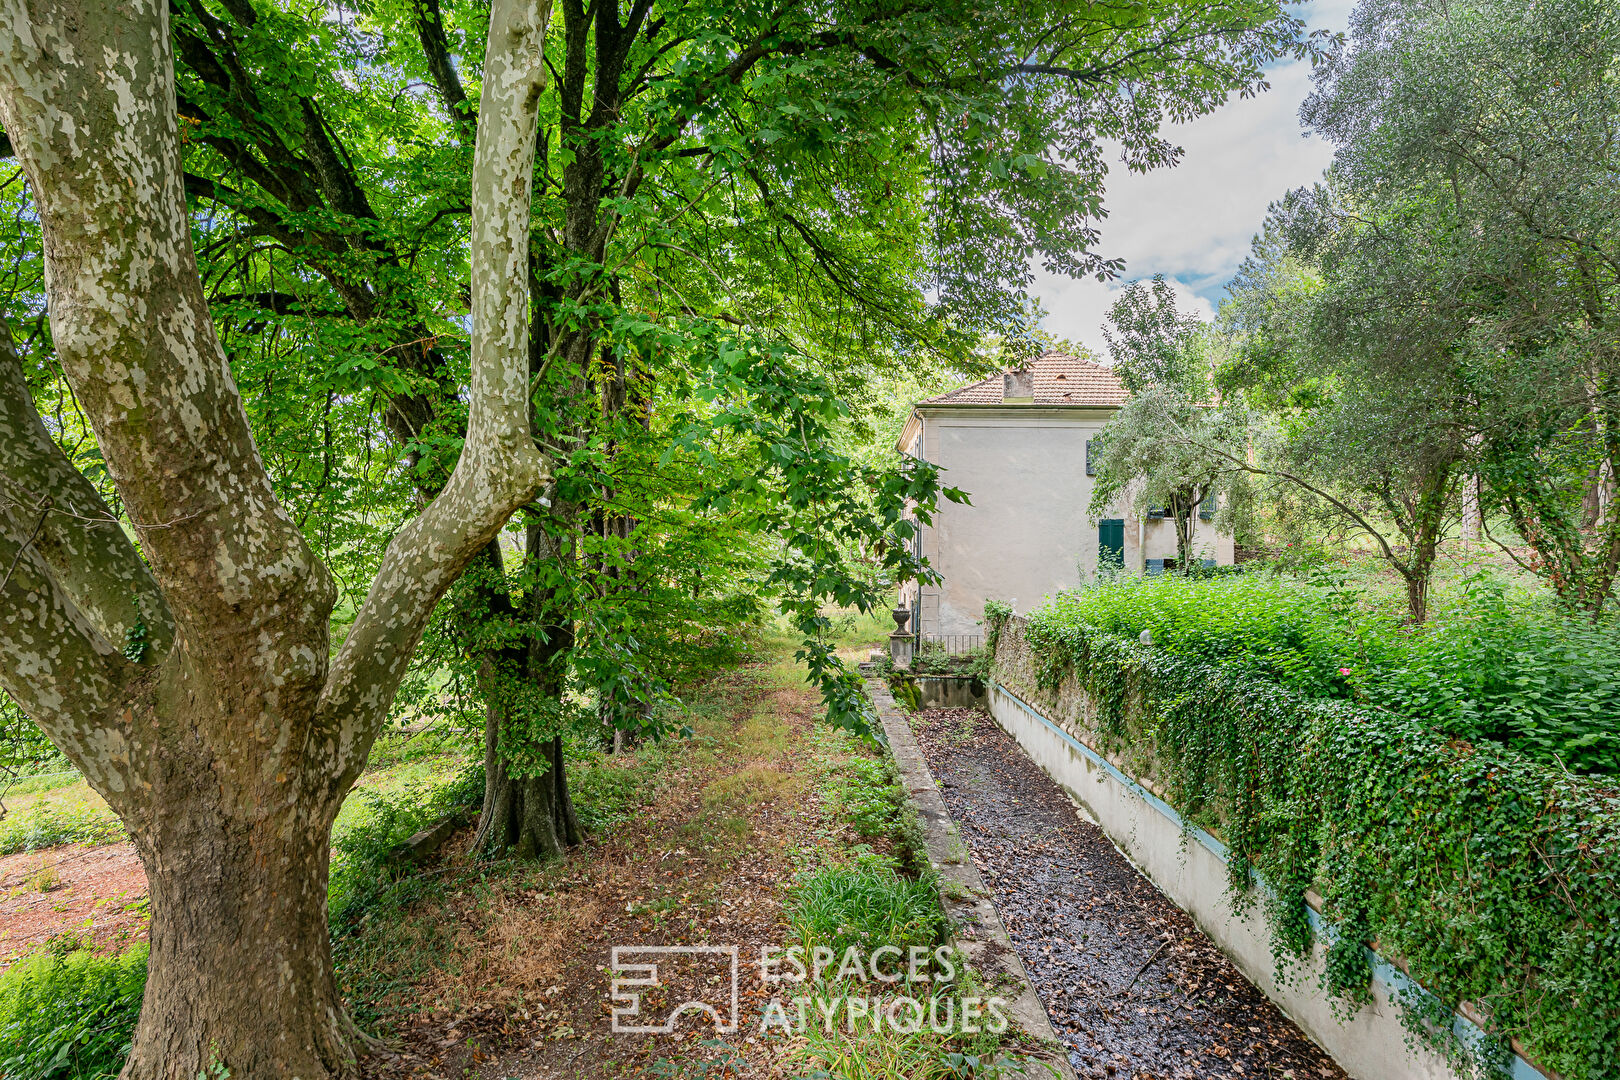 Estate with 19th century buildings to renovate on 2.5 hectares of wooded land